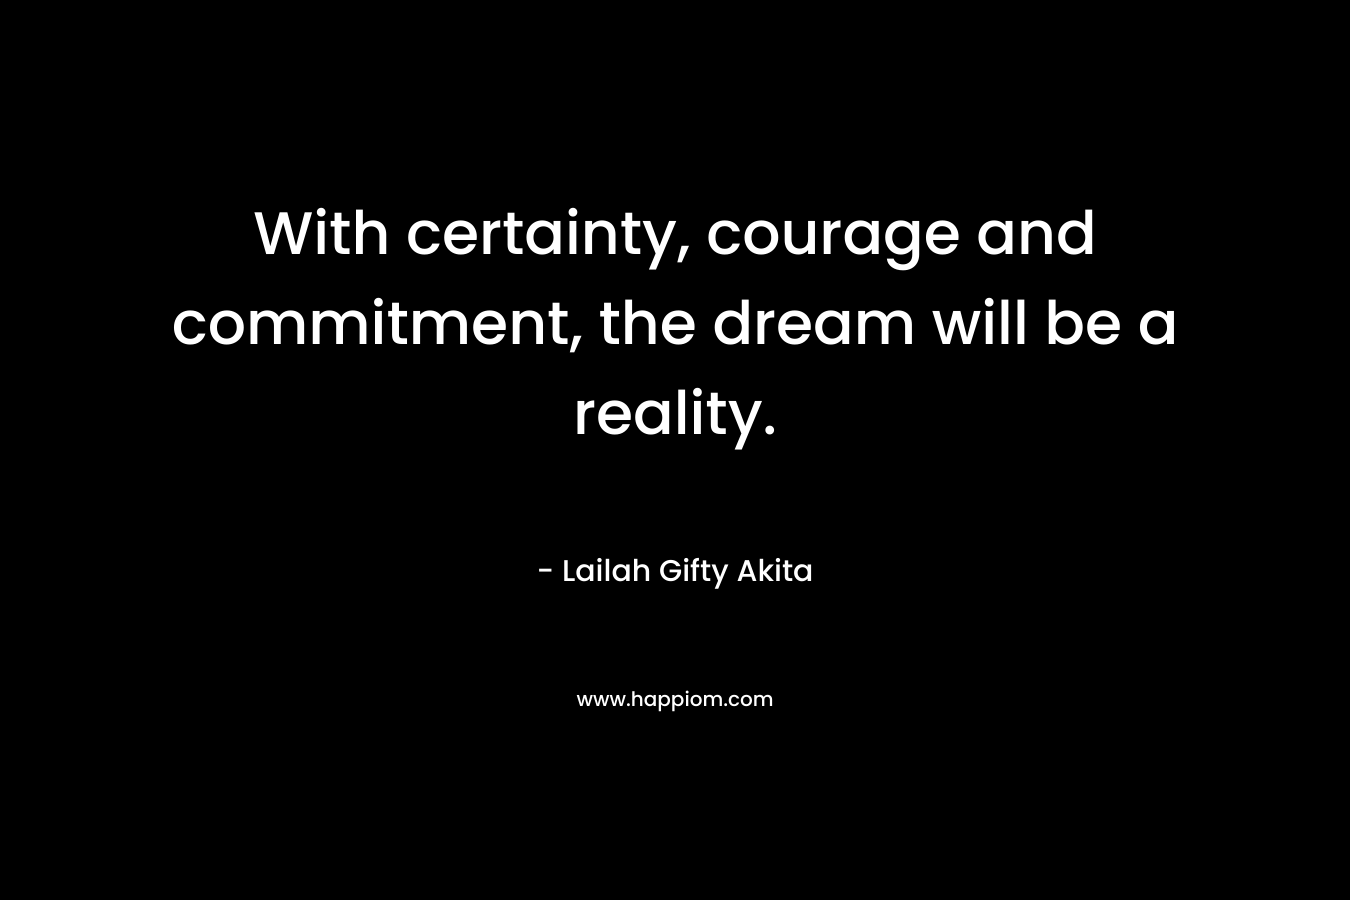 With certainty, courage and commitment, the dream will be a reality.